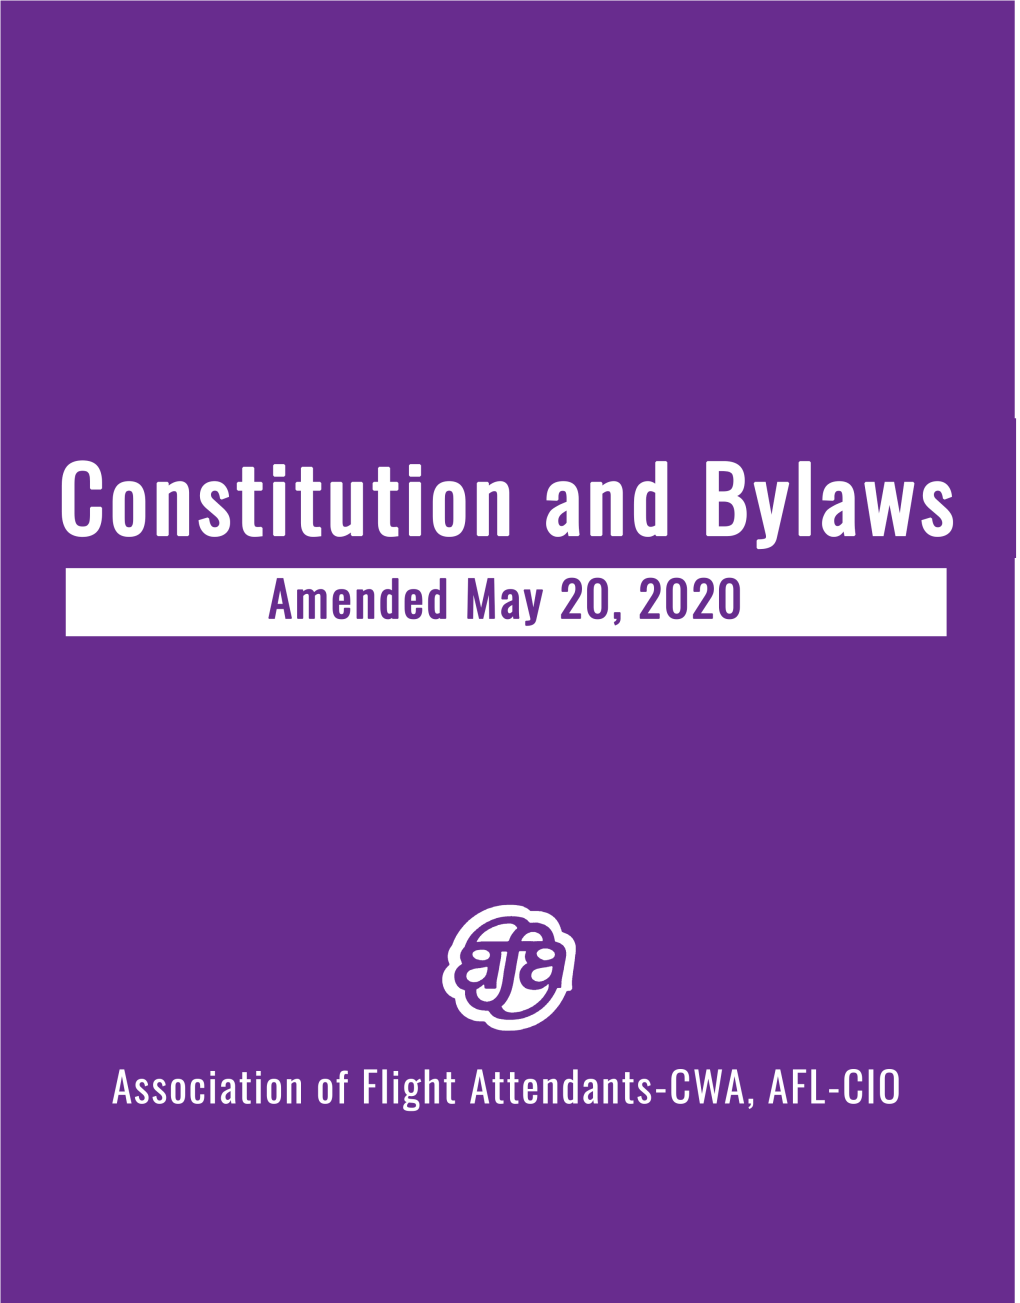 AFA-CWA Constitution and Bylaws